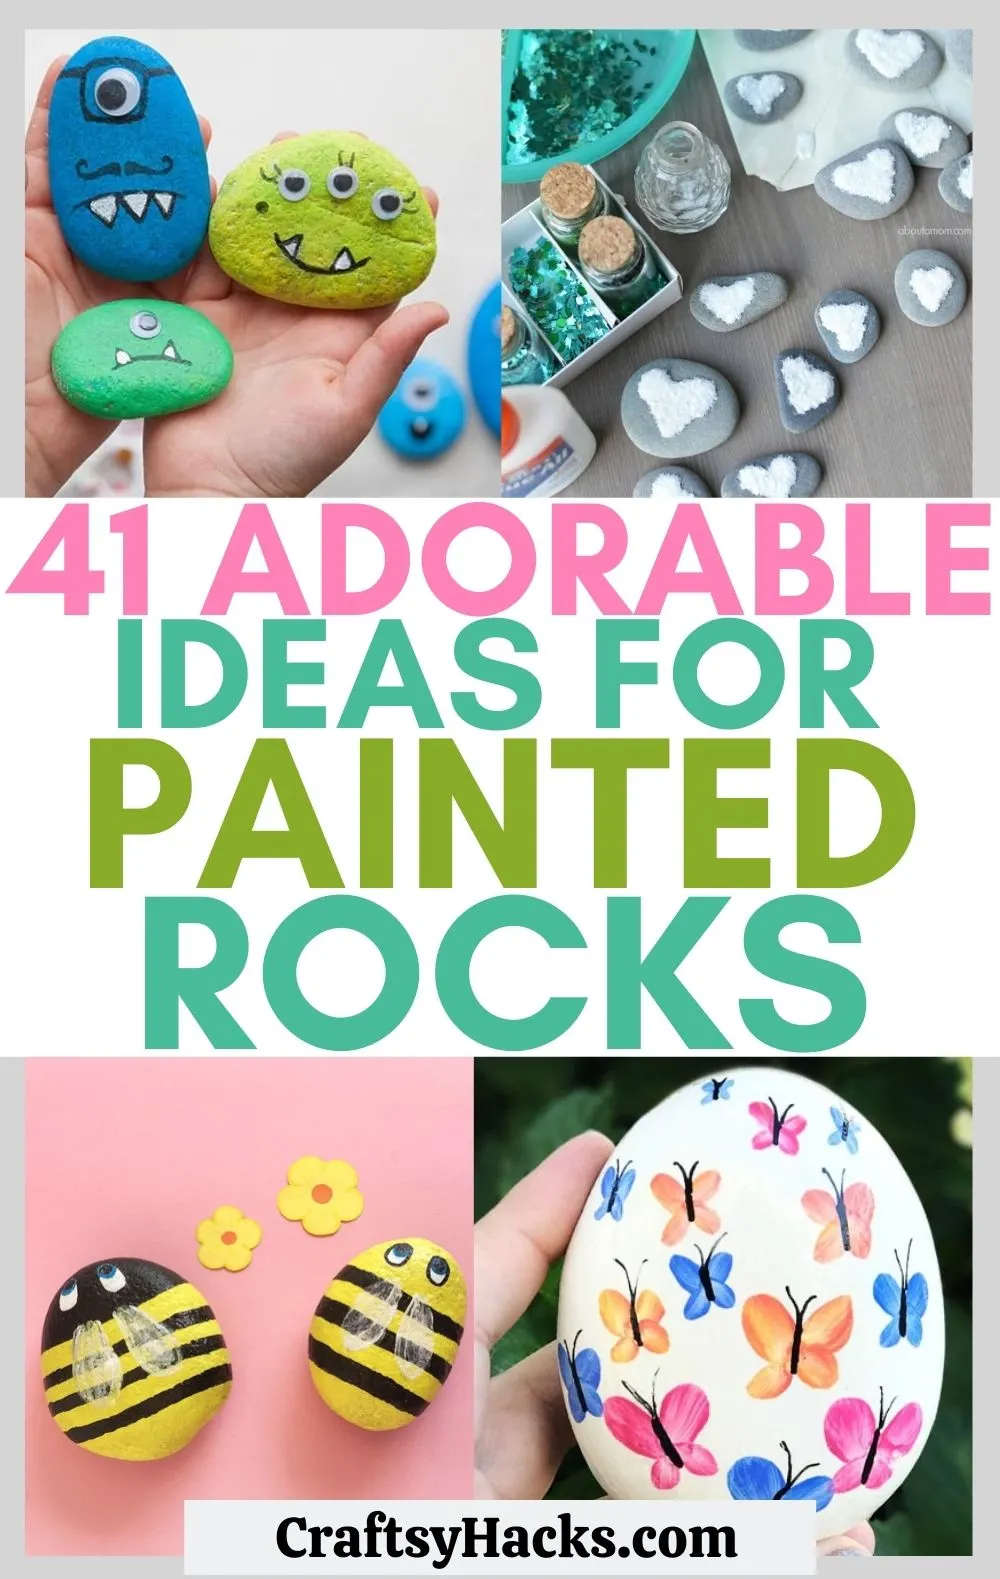 8 Best Rock Painting Ideas That Will Catch Your Eye 